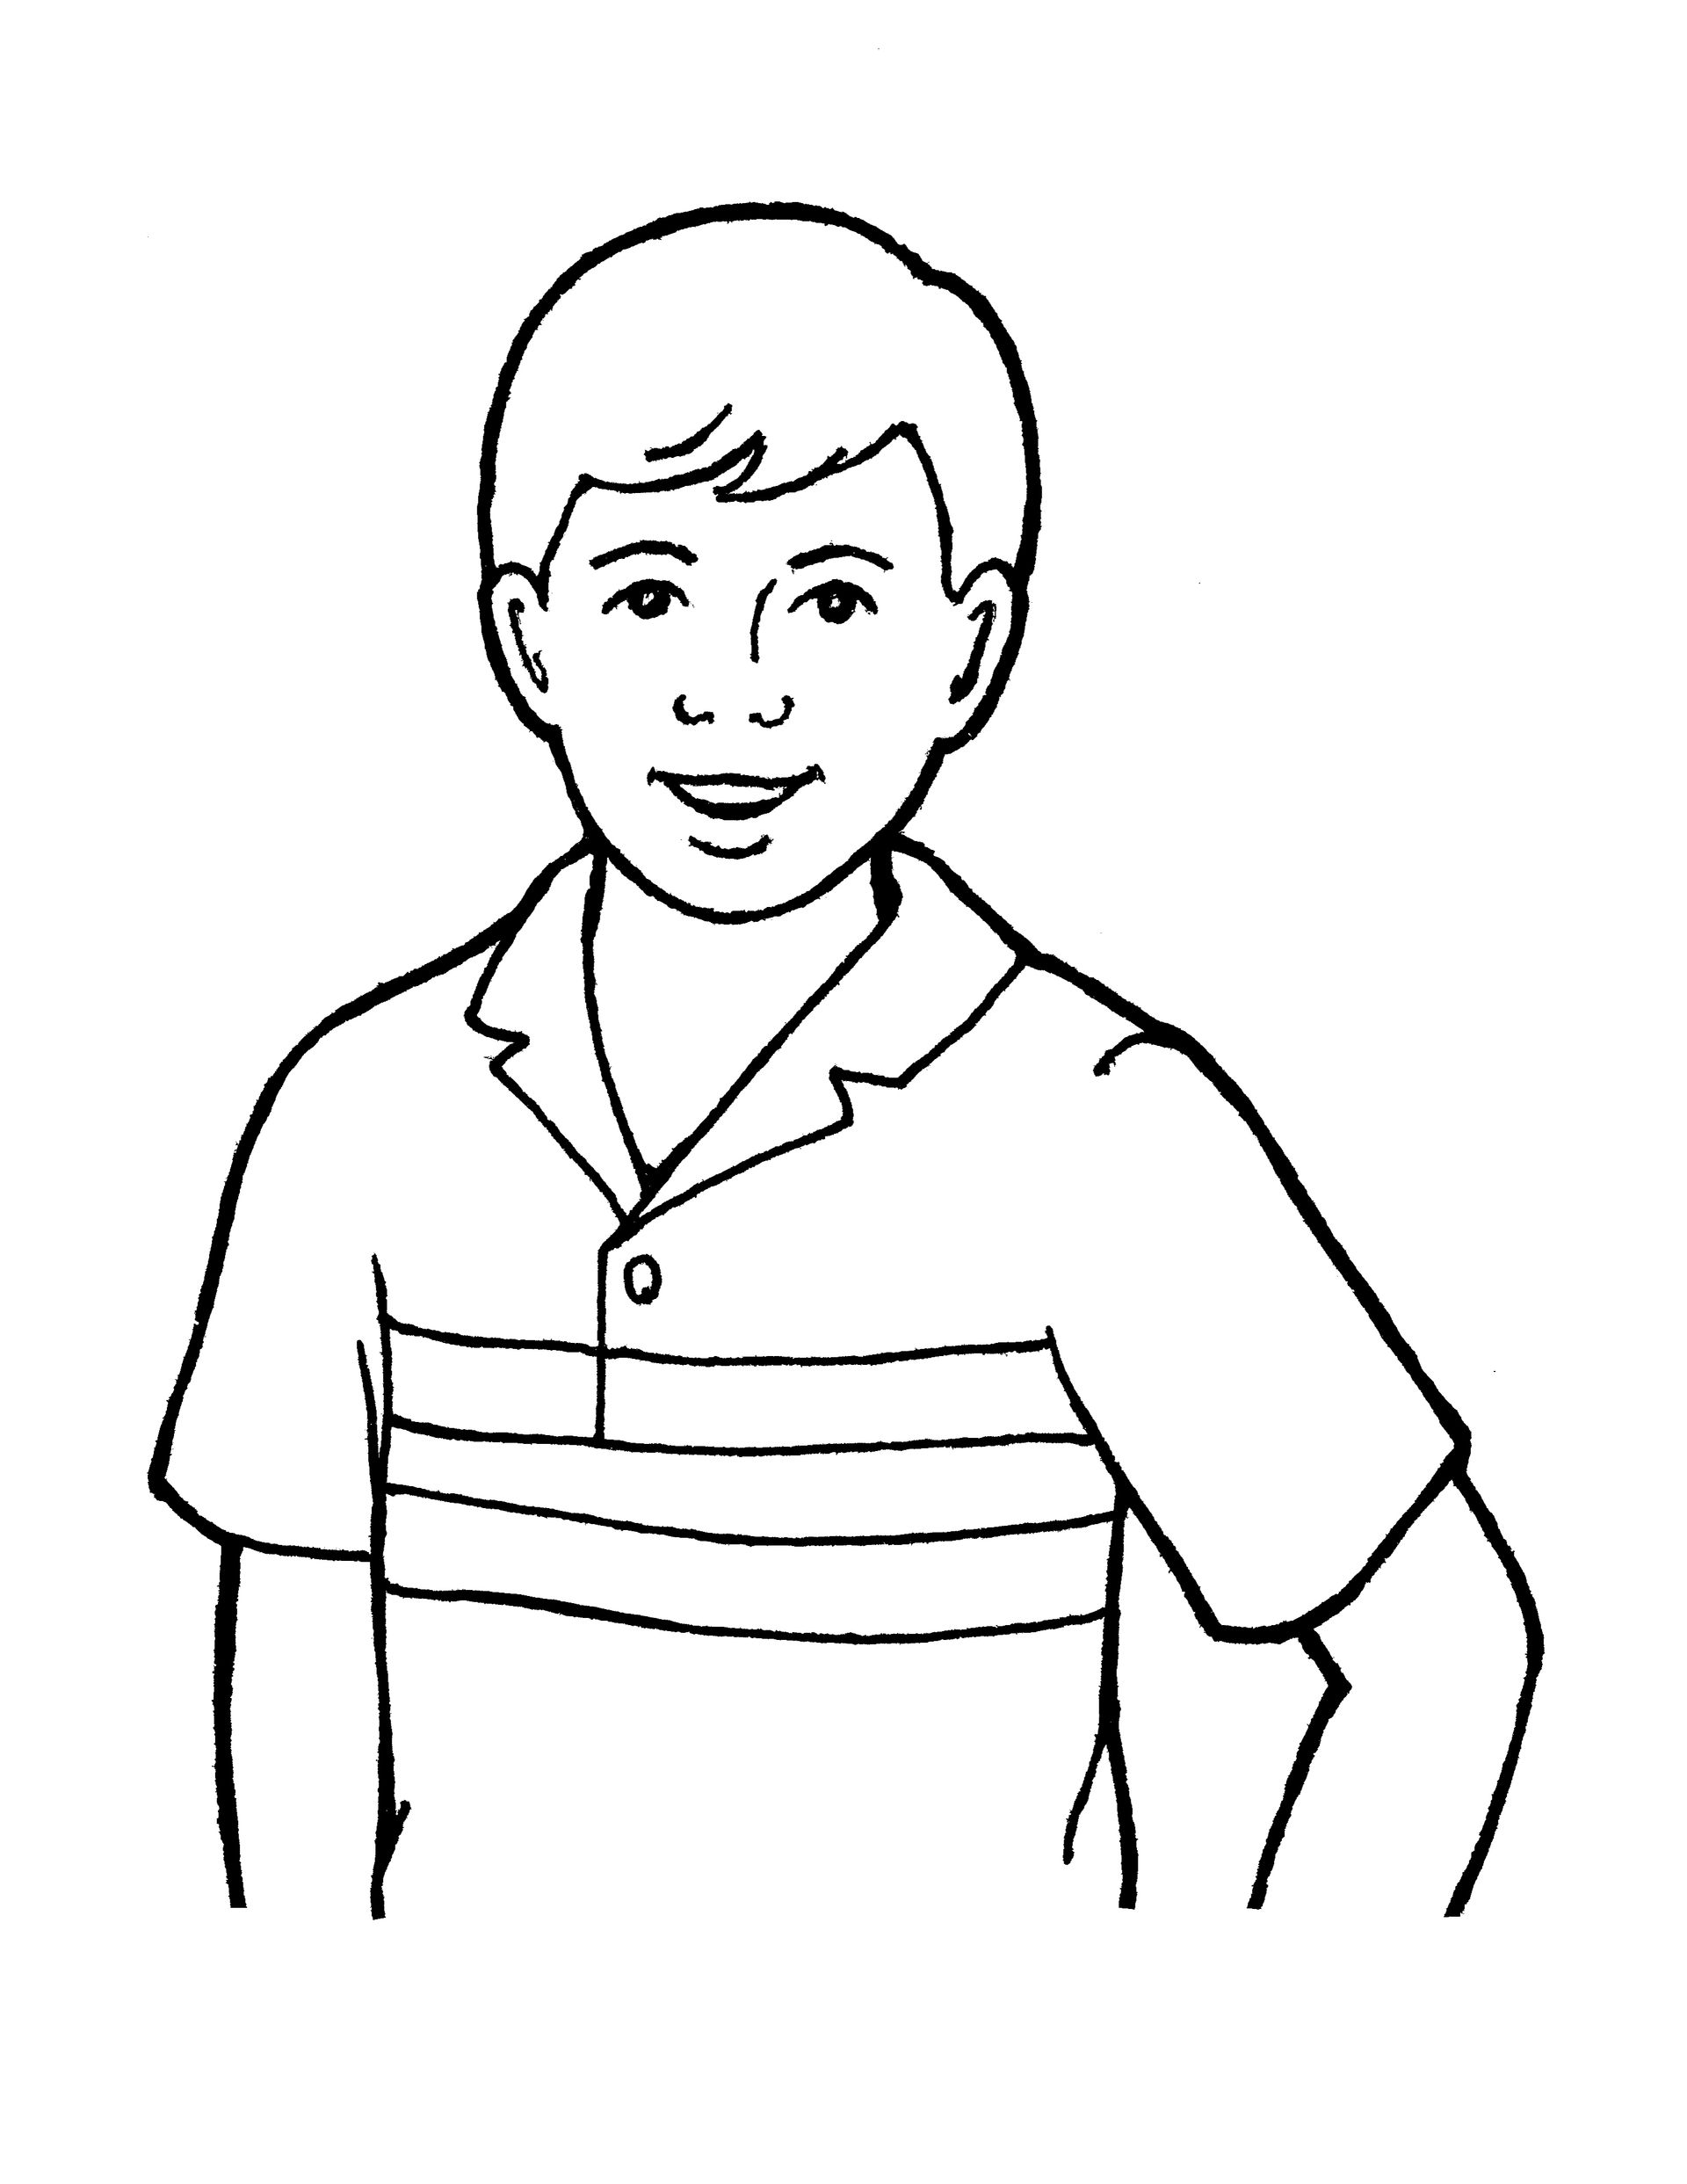 An illustration of a boy or brother, from the nursery manual Behold Your Little Ones (2008), page 59.